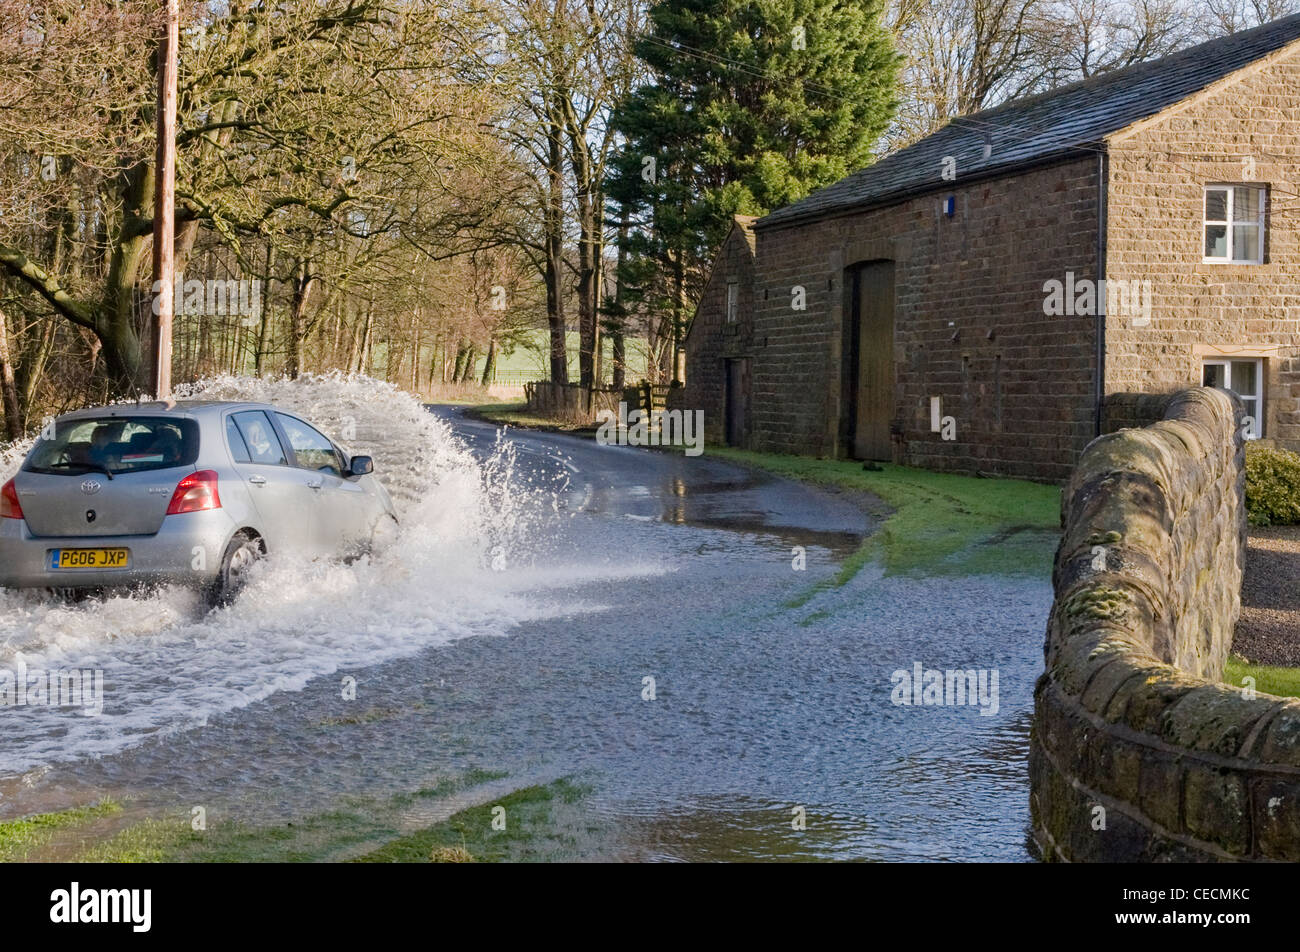 Flooding - silver car (Toyota) driving & splashing through deep flood water on flooded rural road after torrential rain - North Yorkshire, England, UK Stock Photo